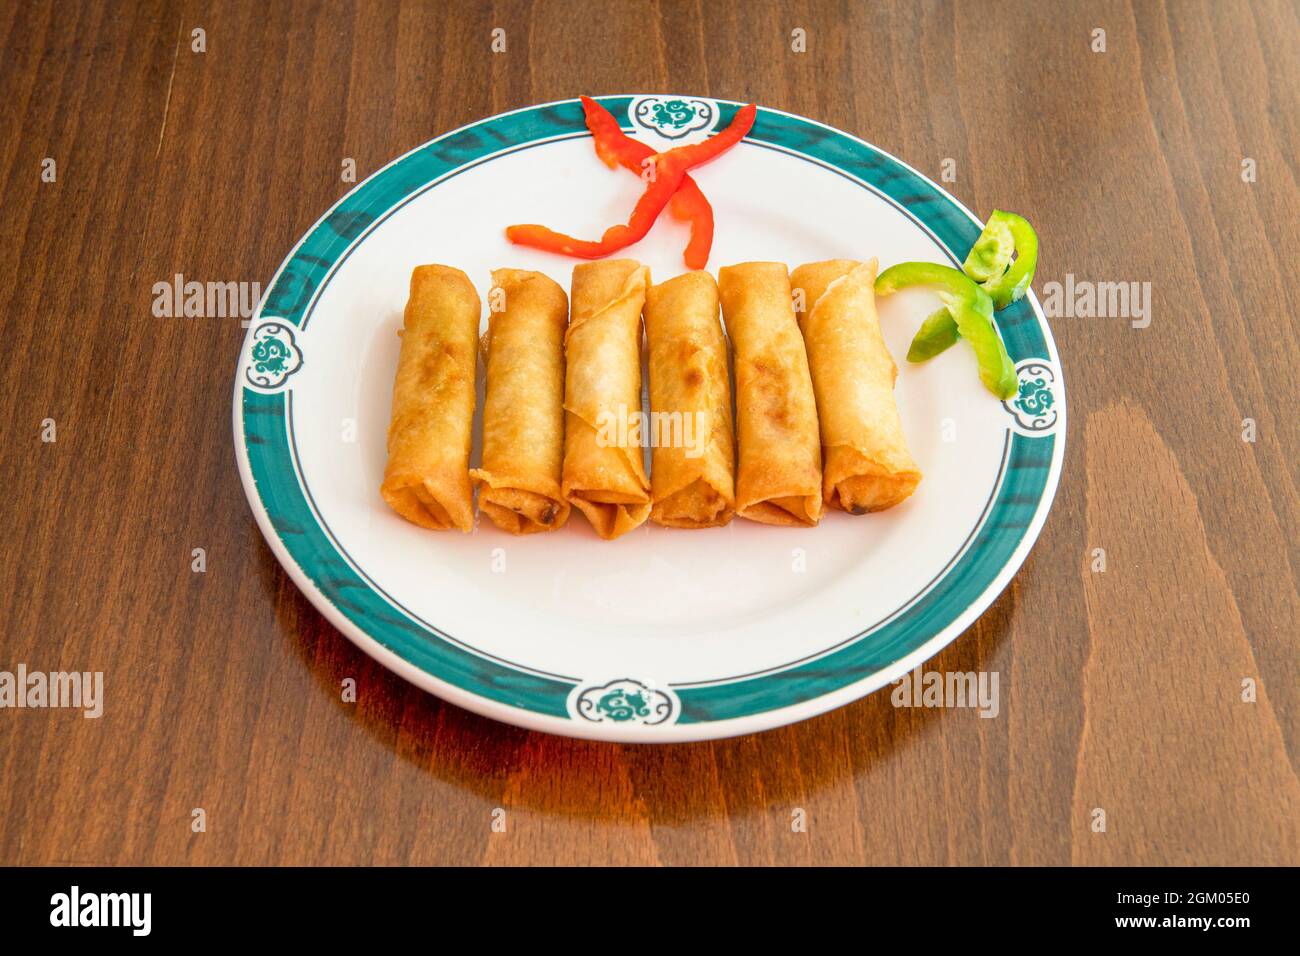 Chinese imperial crunchy rolls fried in olive oil on white plate Stock Photo